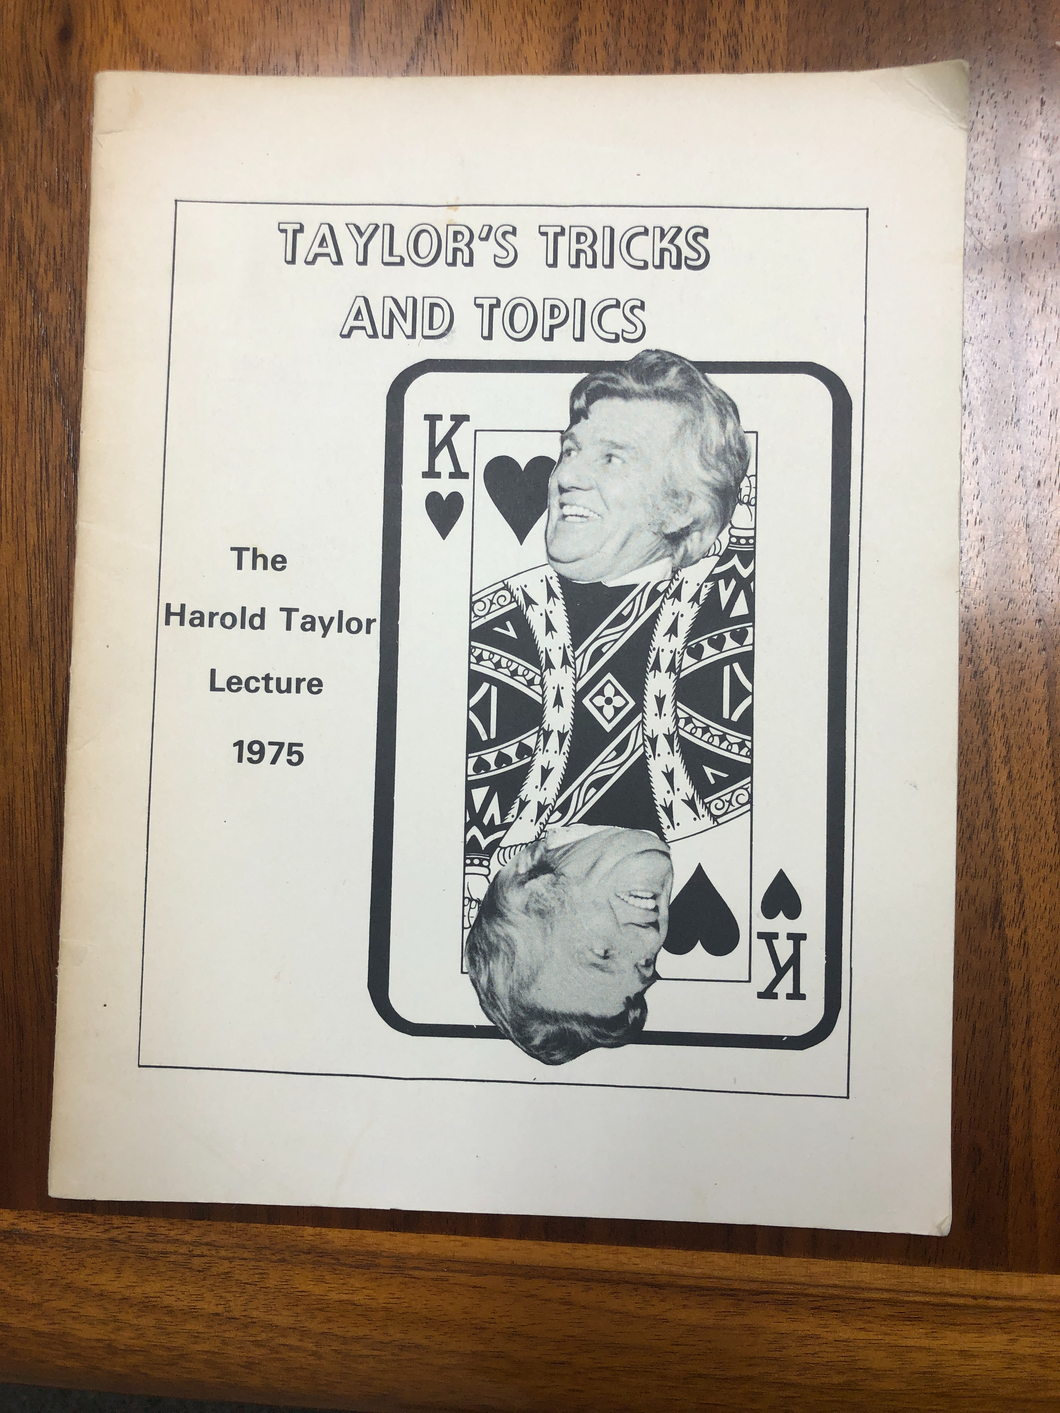 Taylors tricks and topics: The Harold Taylor Lecture, 1975